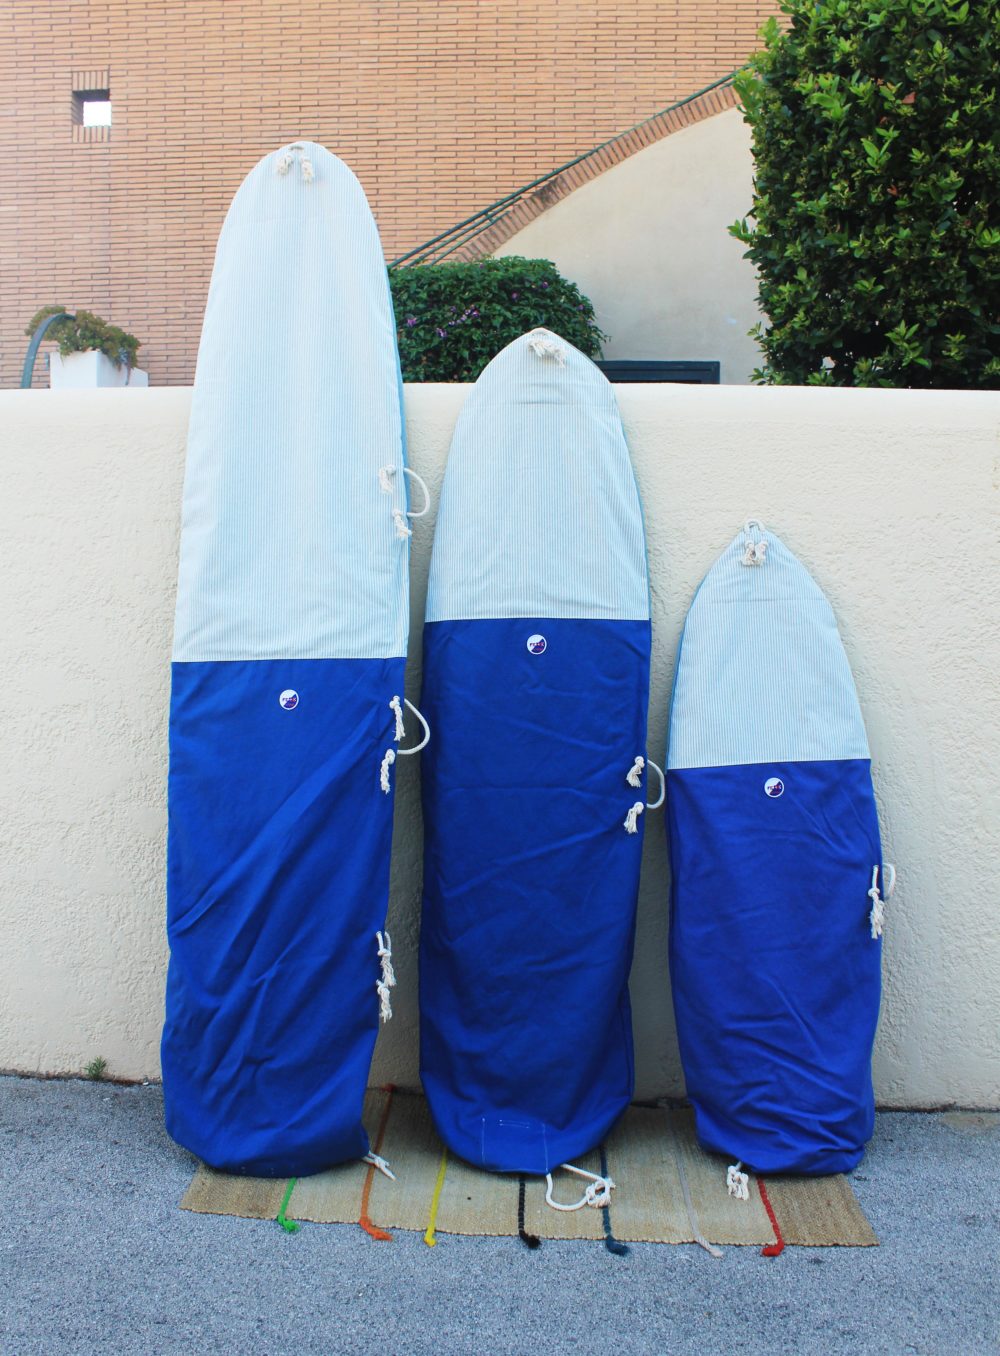 Blue Stripes Cotton Canvas Surfbag x any size of surfboard. Handmade in Italy by Fede Surfbags